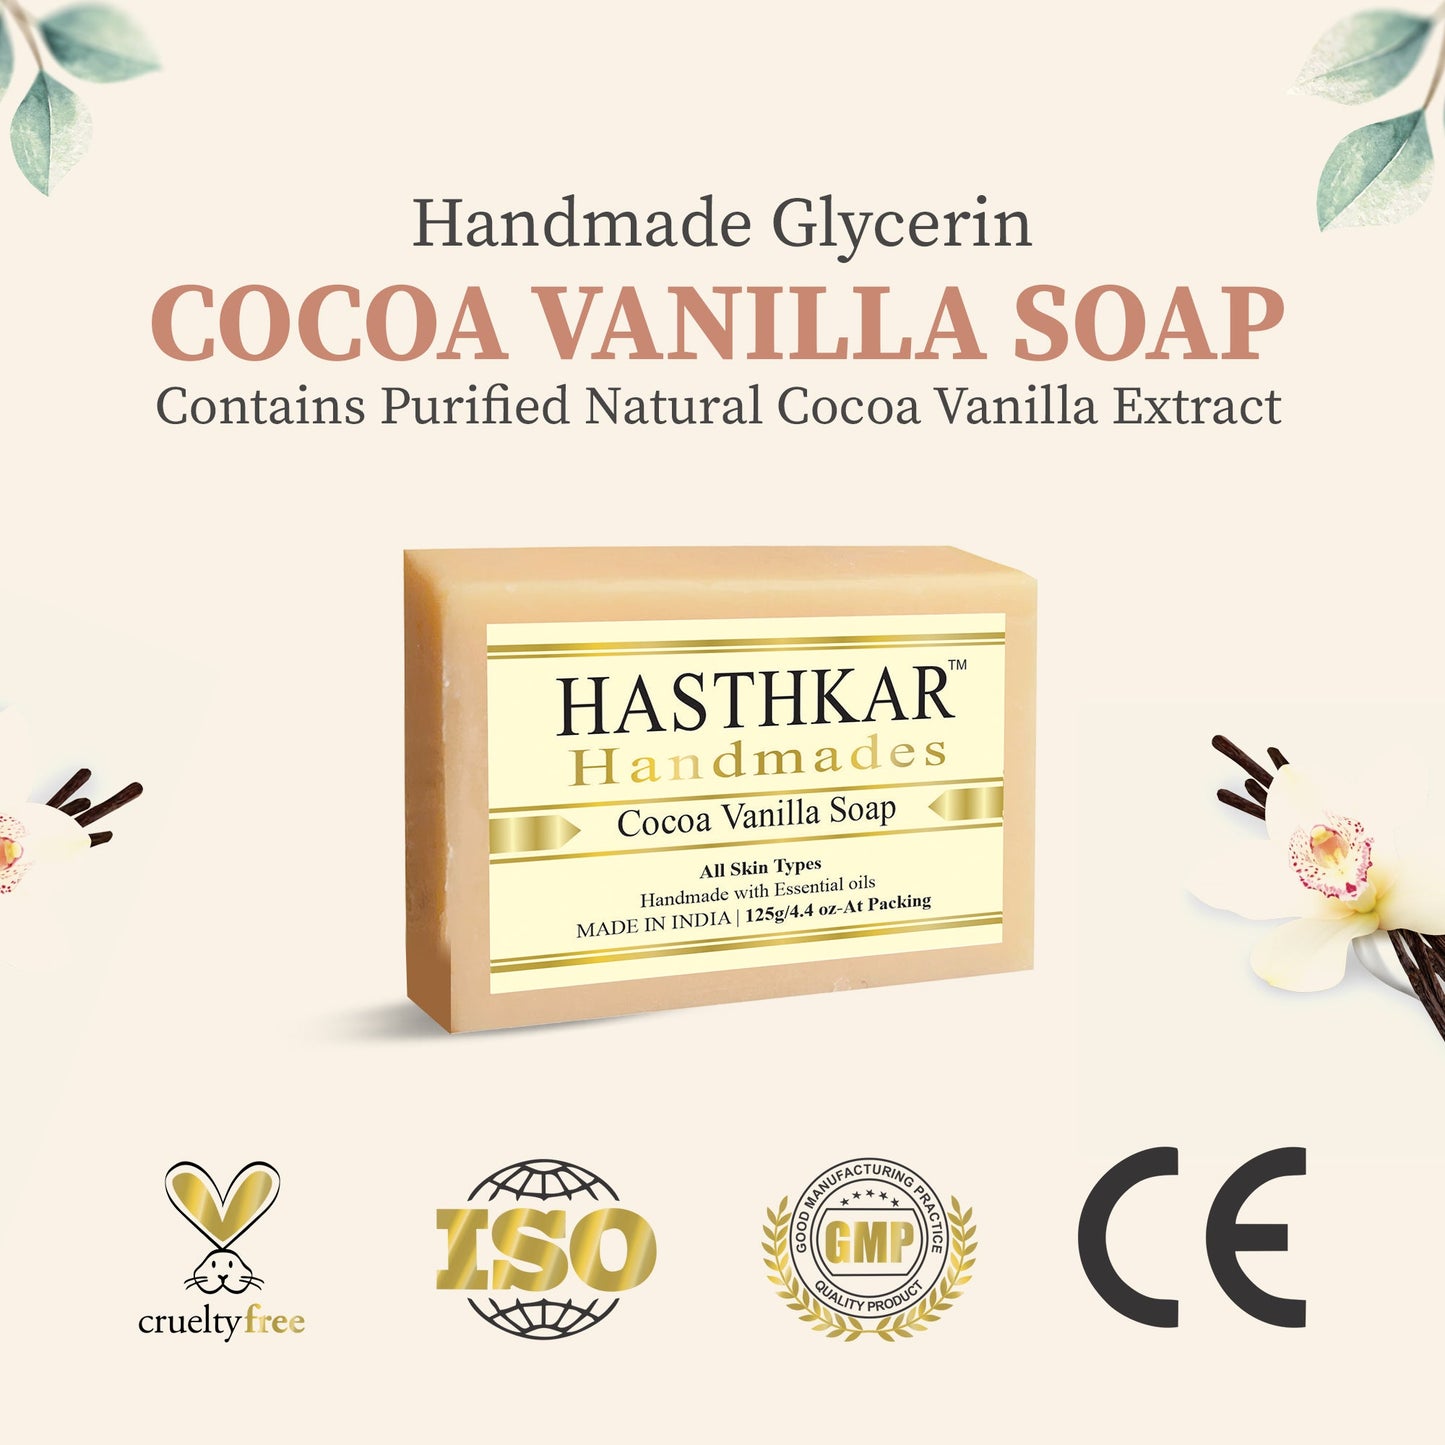 Hasthkar Handmades Glycerine Cocoa Vanila Soap For Softens The Skin Texture And Provides Complete Nourishment And Moisture To The Skin | Pleasing And Calming | Repairing Skin Tissue Thus Leads To Skin Glow And Charm - 125Gm